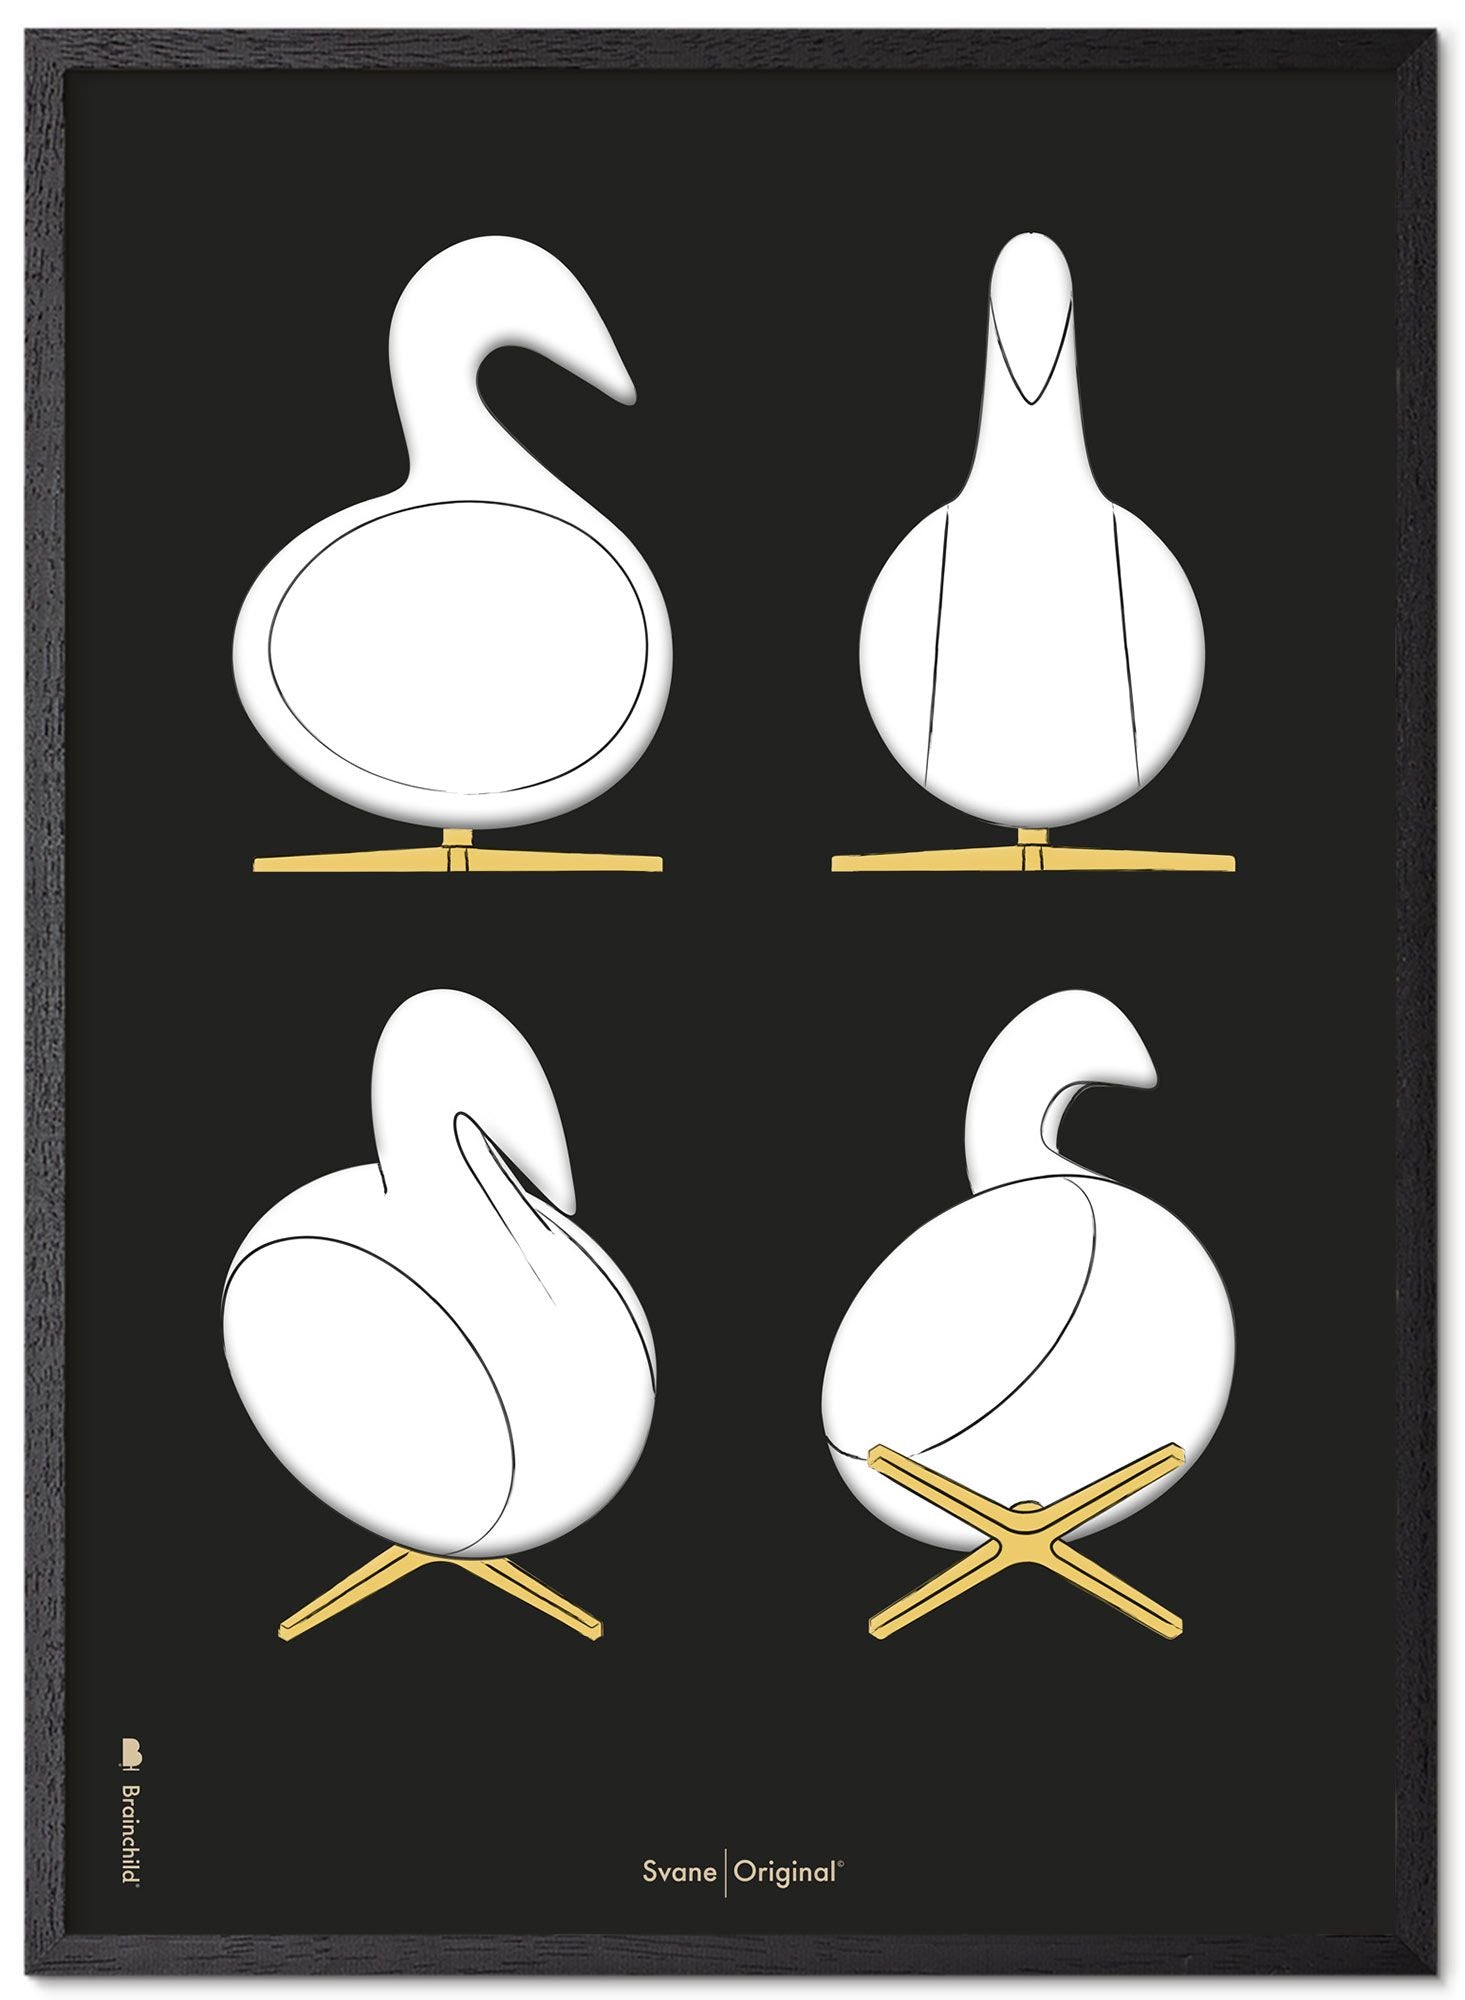 Brainchild The Swan Design Sketches Poster Frame Made Of Black Lacquered Wood 30x40 Cm, Black Background